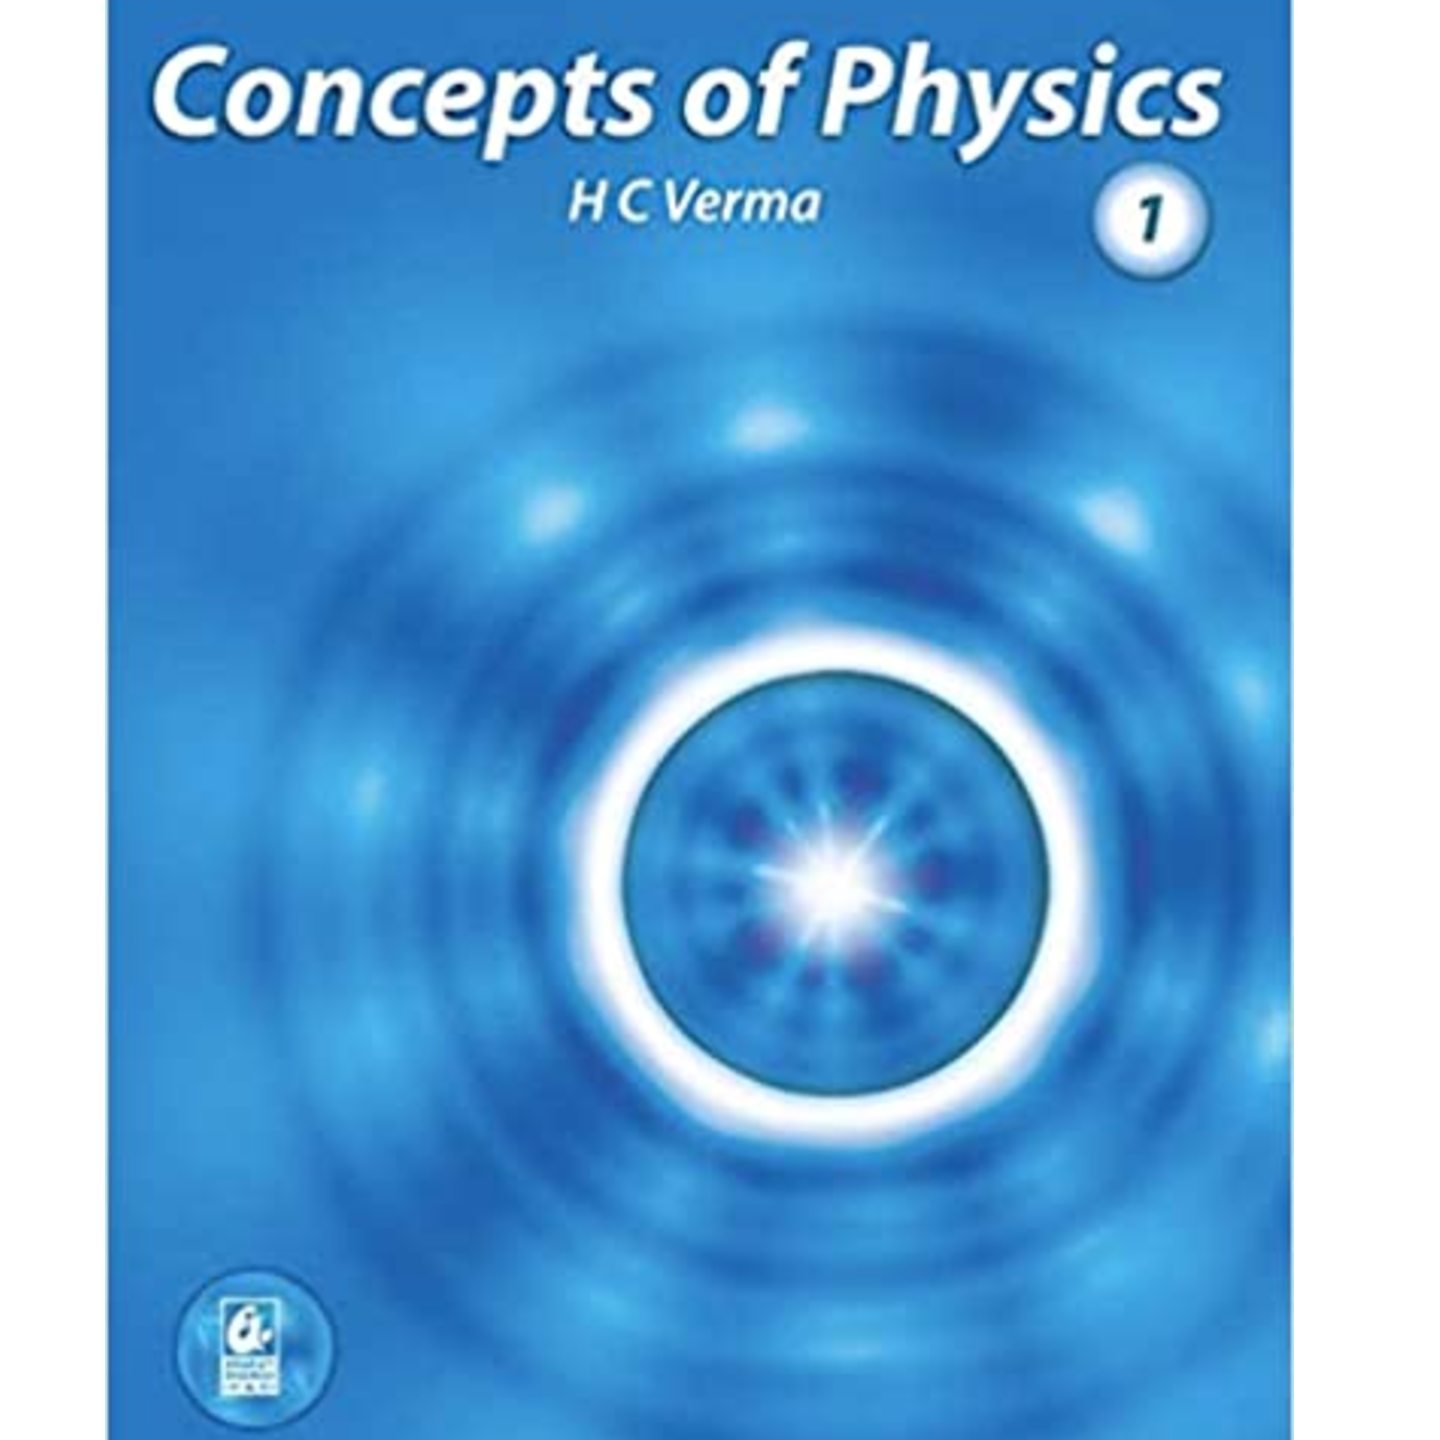 Concept of Physics Part-1